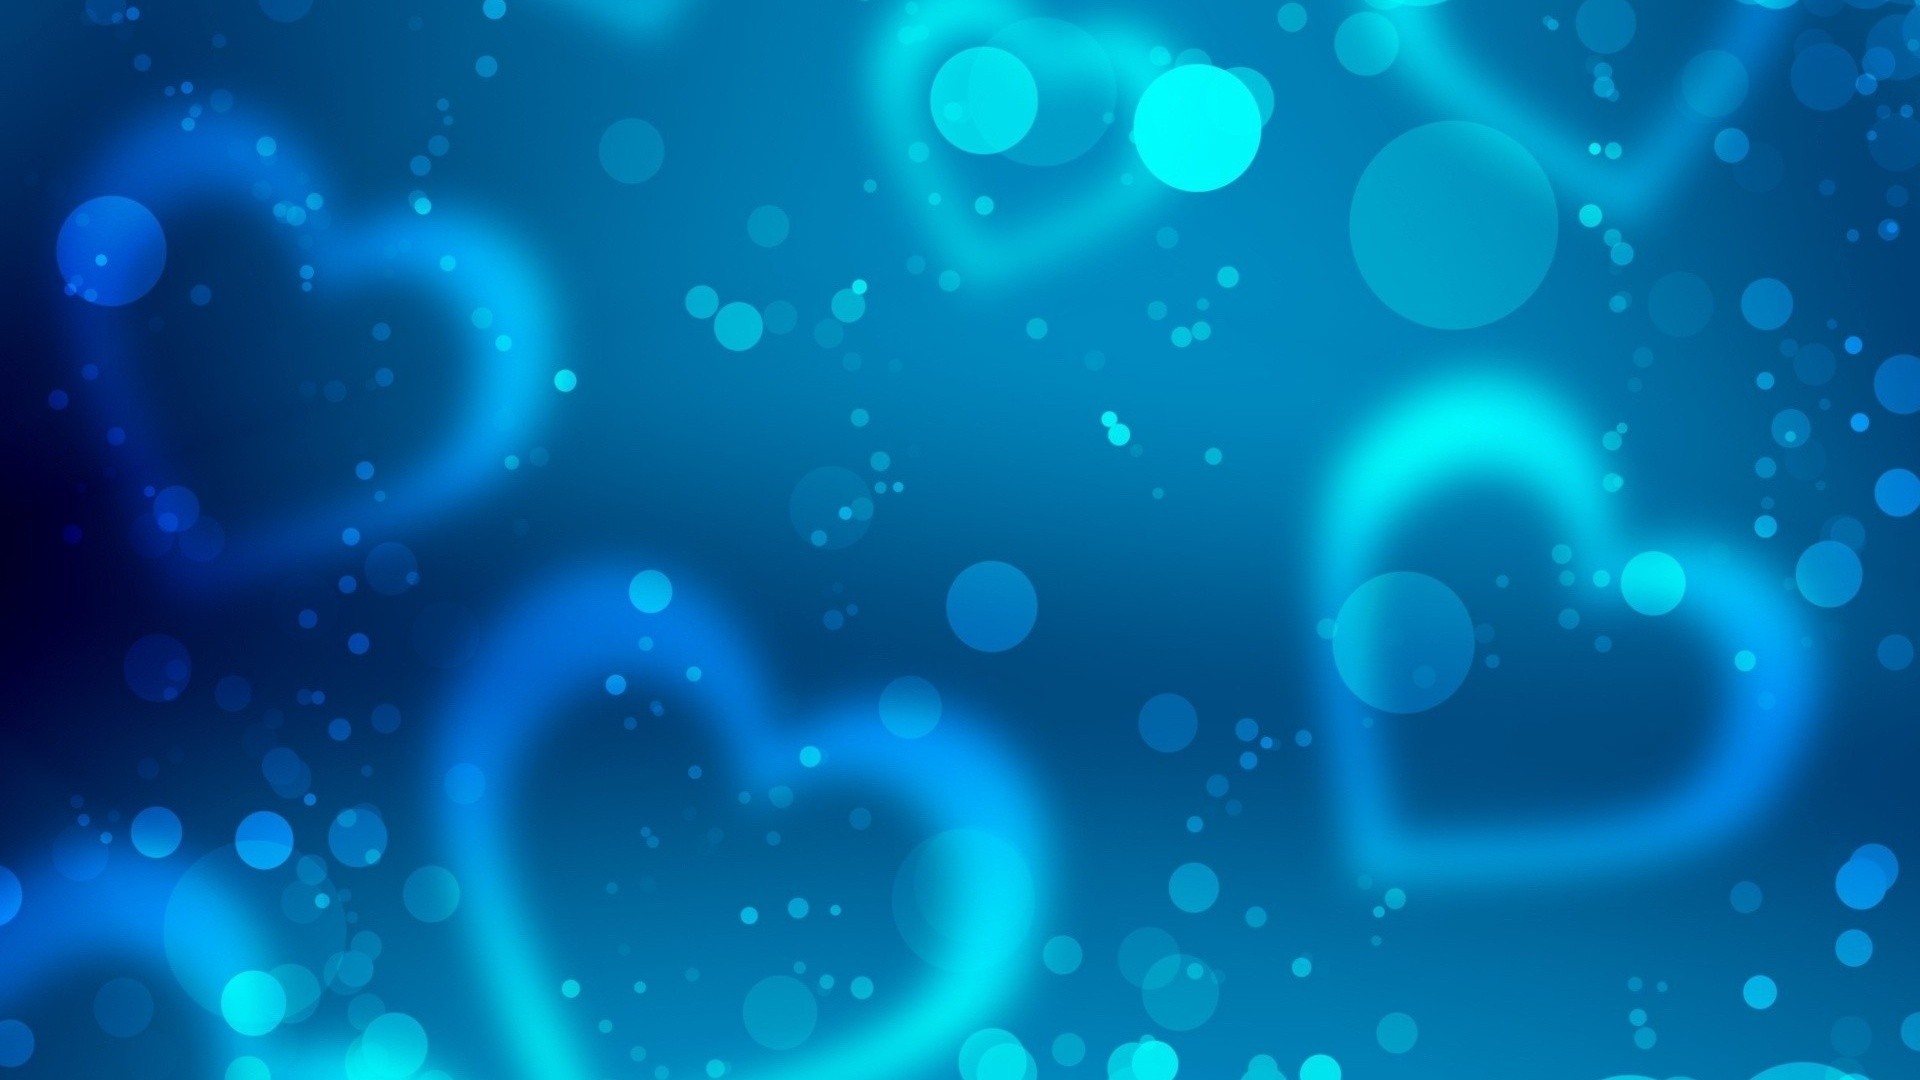 Abstract Blue Love Circles Hearts Background Wallpaper